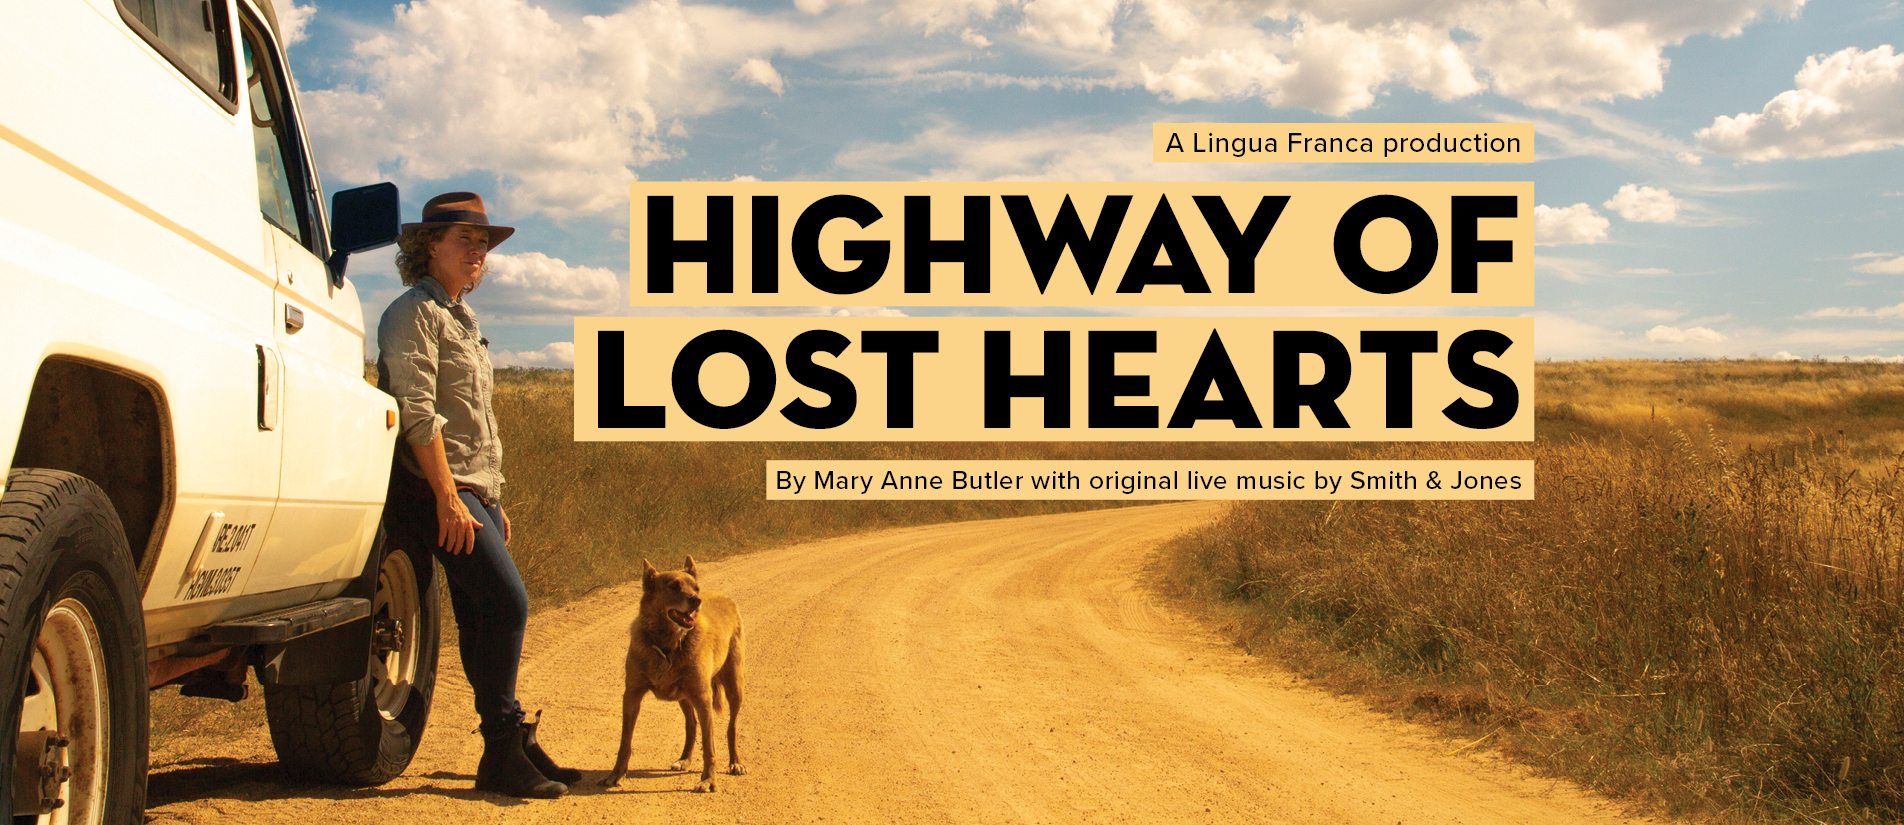 Highway of Lost Hearts